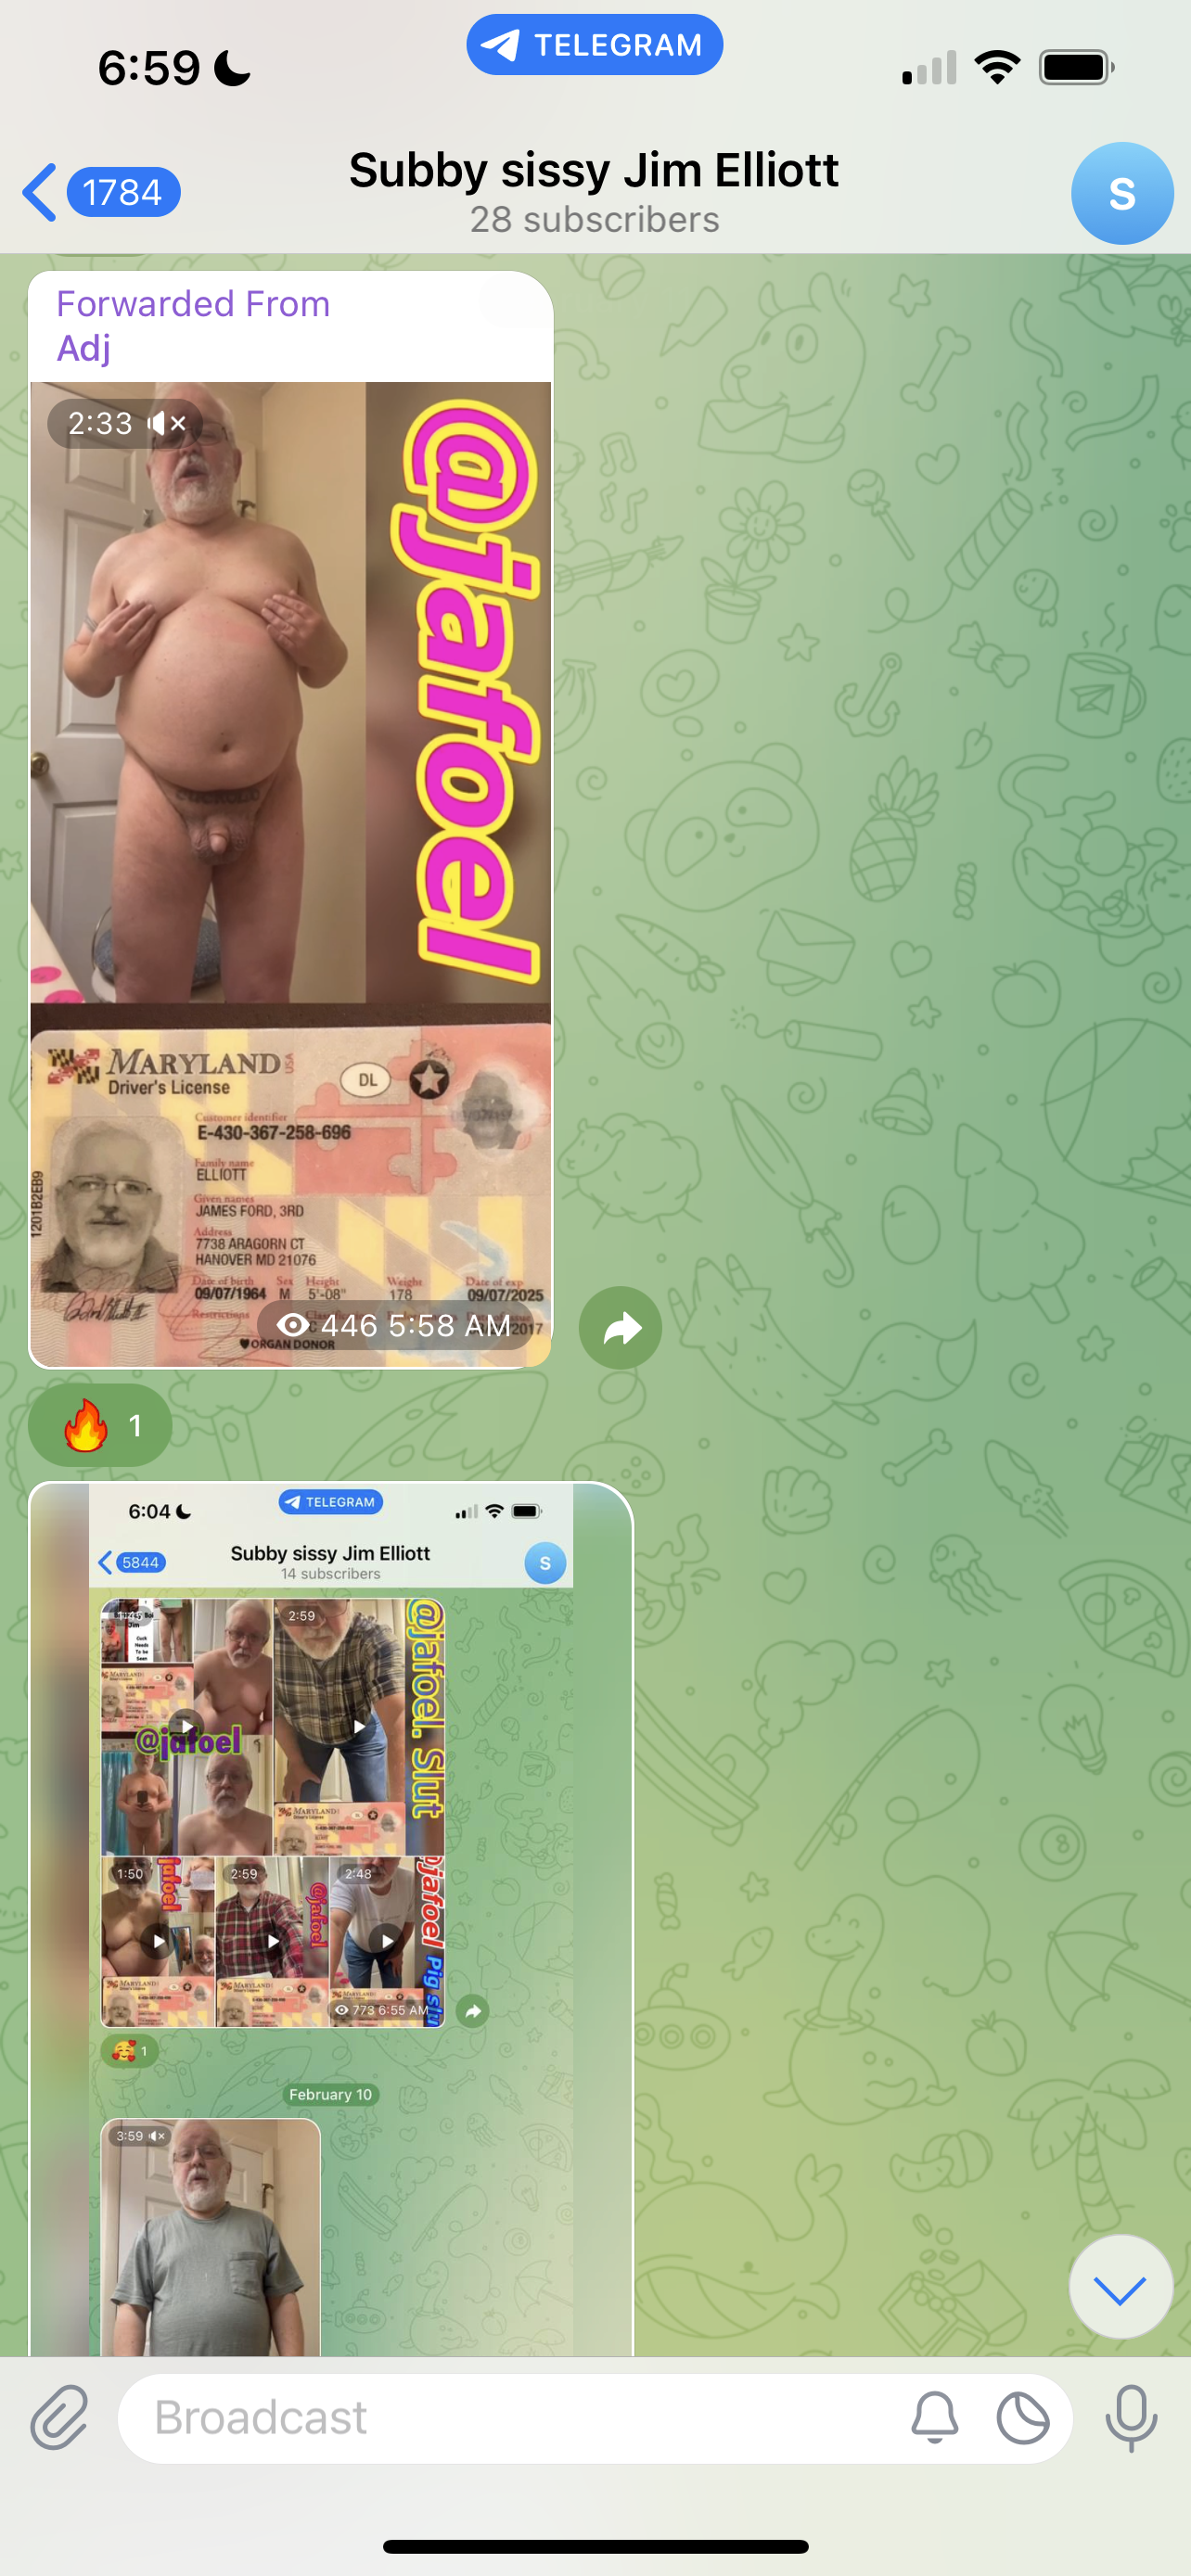 Check out my ID exposure videos on Telegram